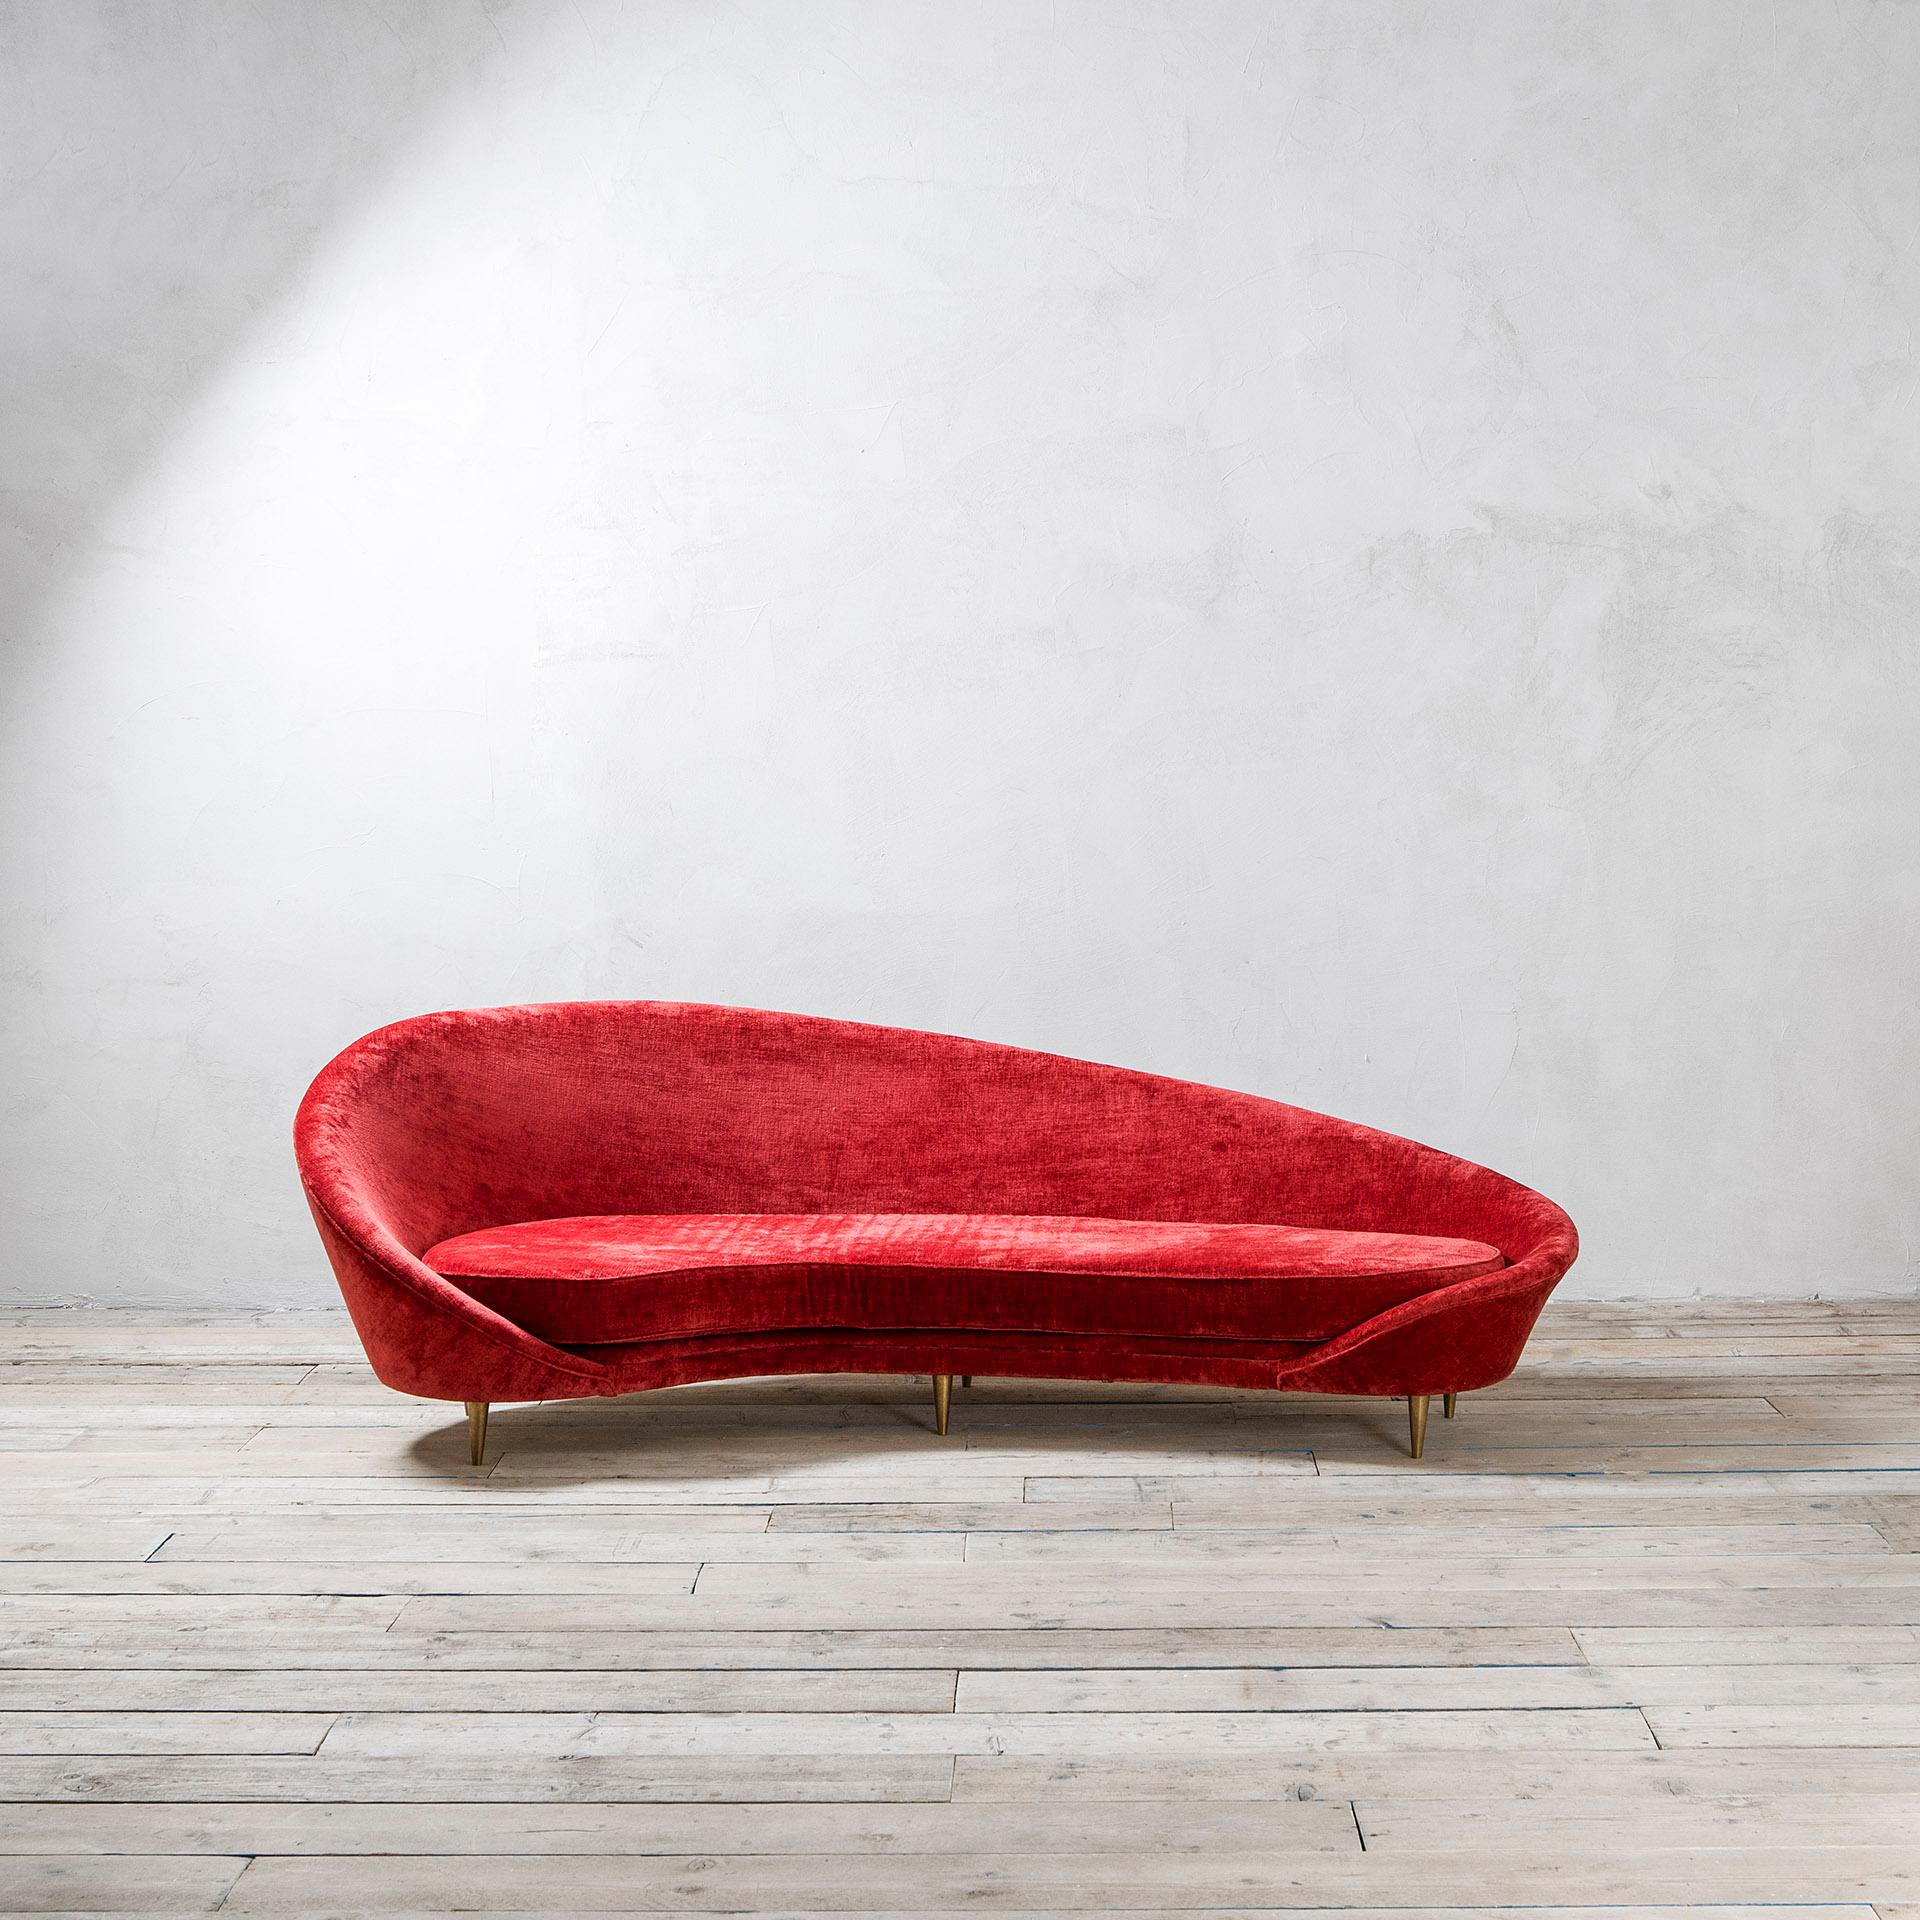 Virgola sofa is inspired by Federico Munari's sofa from the 50s. 
The 6 feet are in full brass, shaped as truncated cone. The main characteristic of this sofa is the fabric: a whole piece of red velvet, a very precious kind of velvet which allows